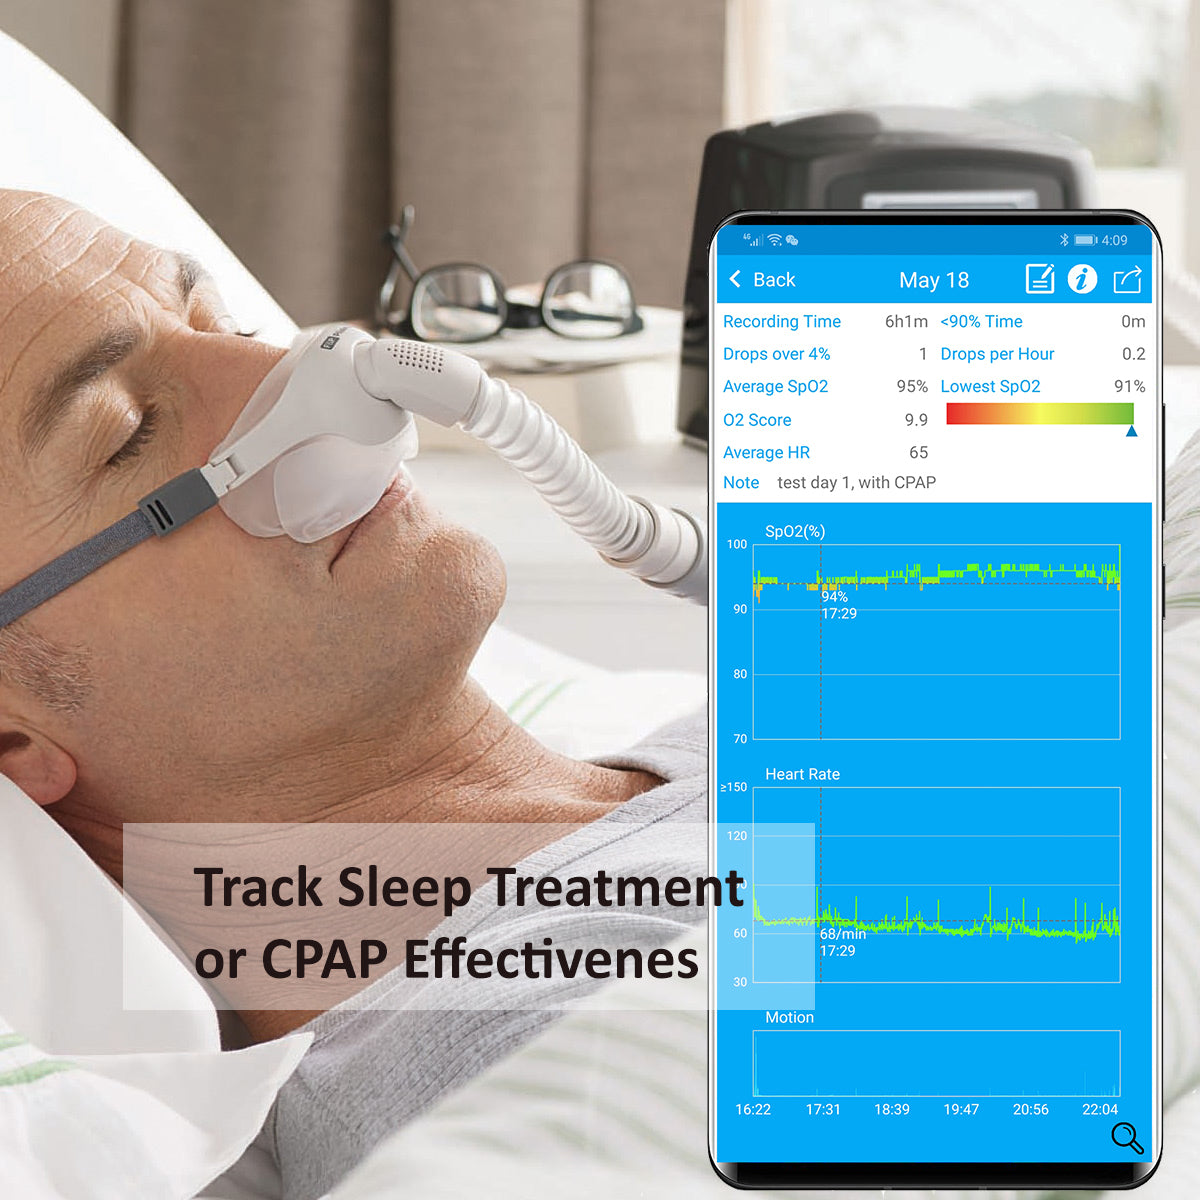 Used, Like New. Lookee® Wrist Sleep Monitor with Vibration Alarm for Sleep Apnea & Low O2 | Tracks Blood Oxygen Saturation Level, Heart Rate & CPAP - Lookee Tech